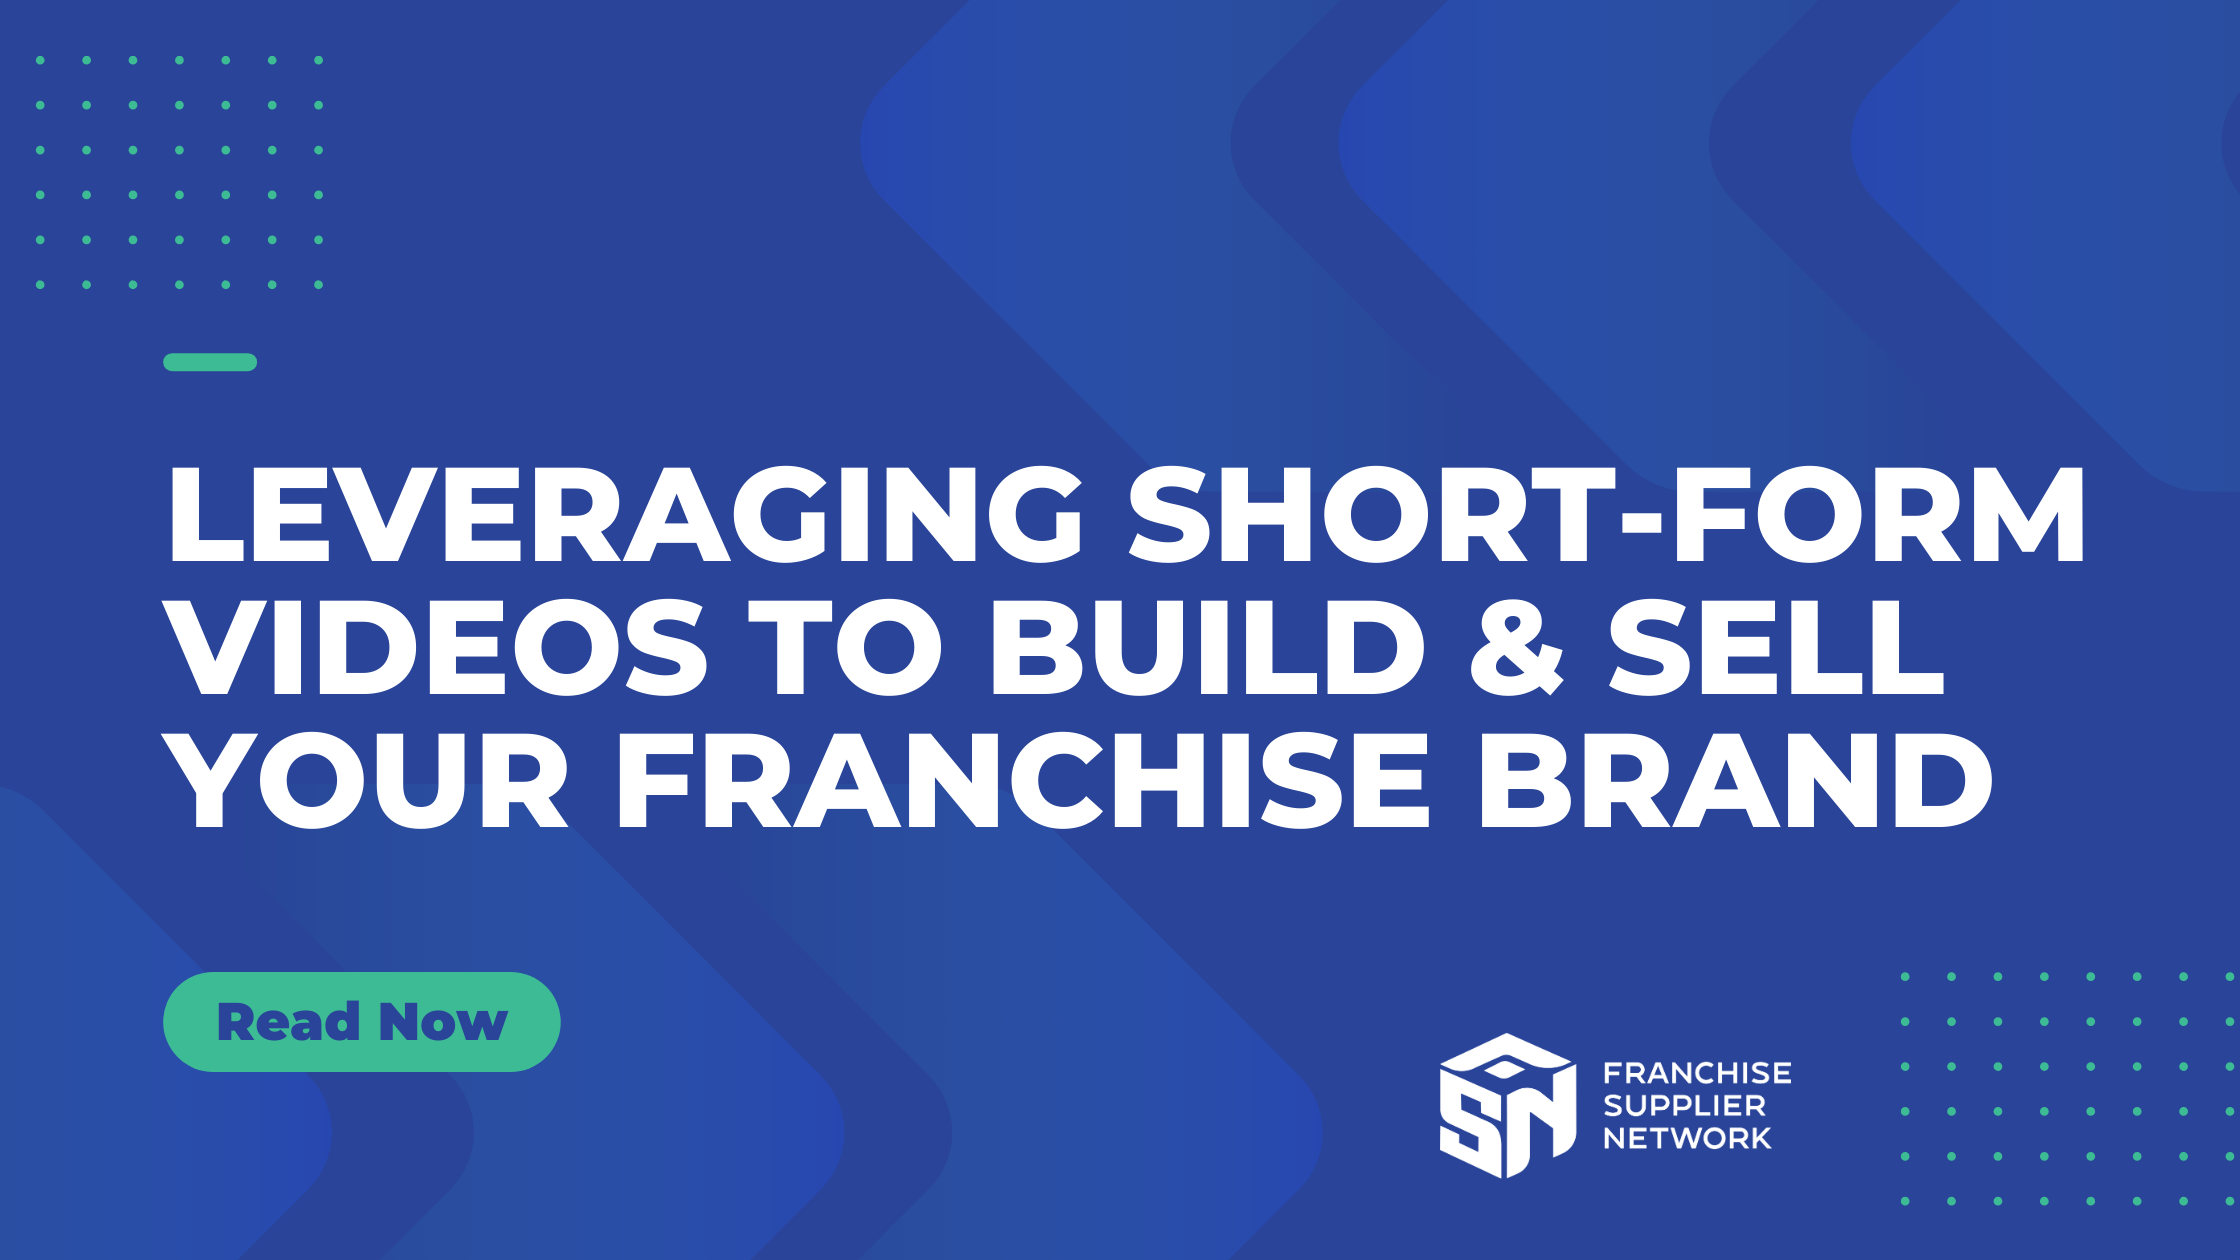 Leveraging Short-Form Videos to Build (and Sell) Your Franchise Brand